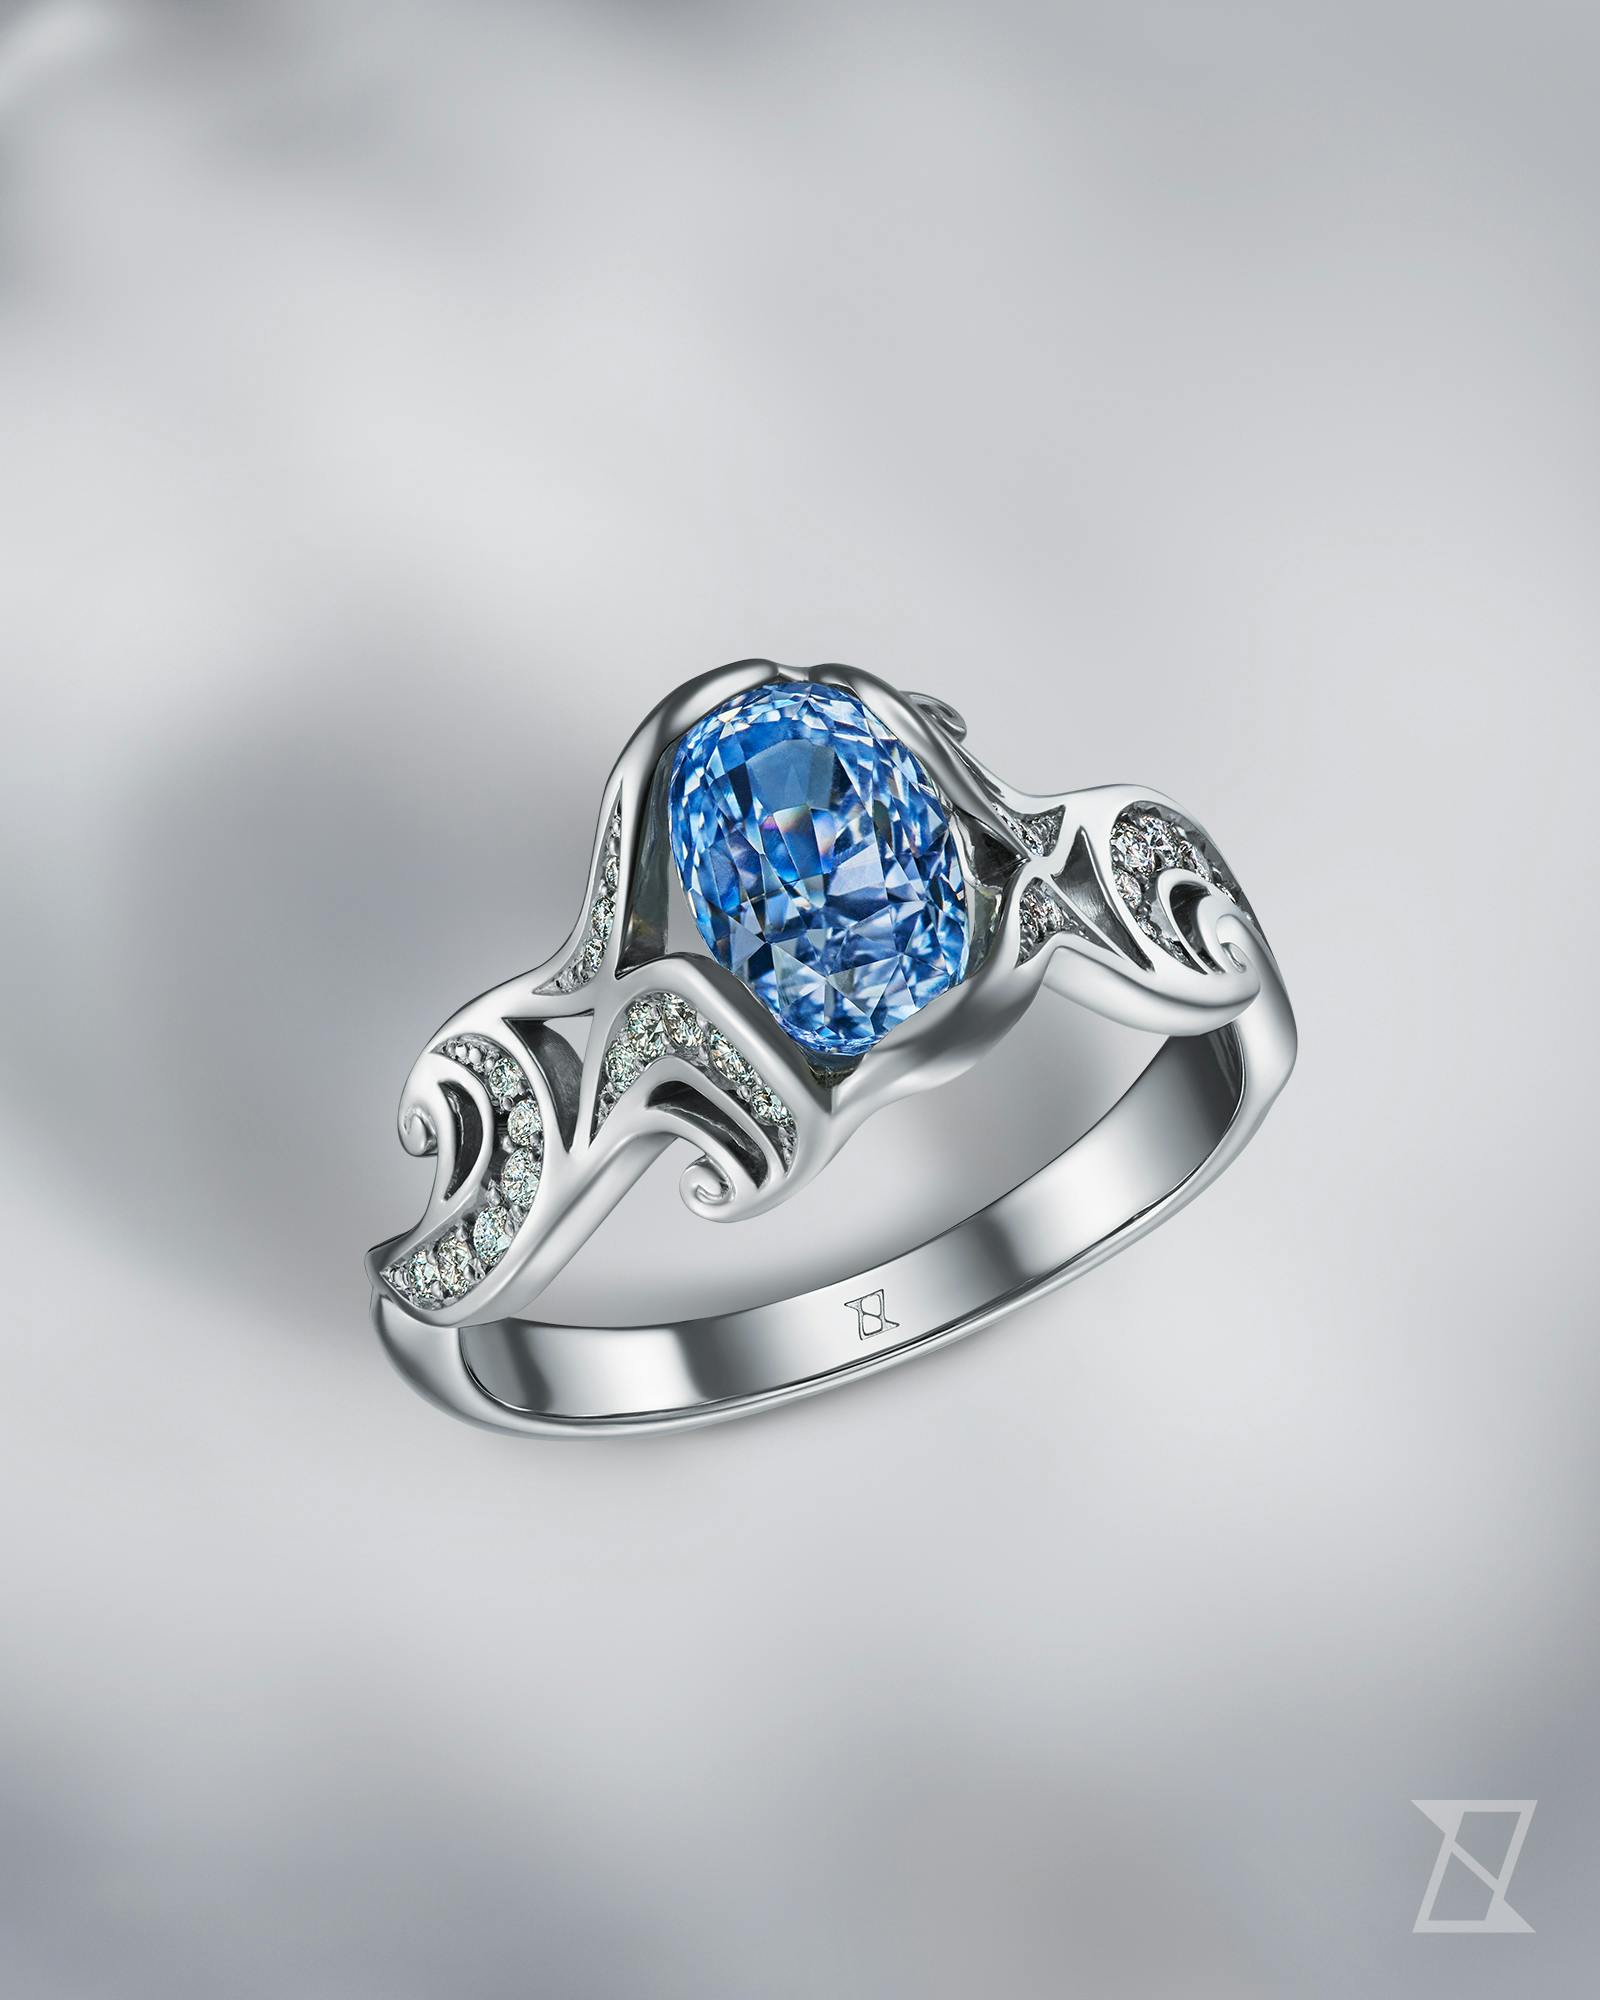 Engagement ring with a sea motif